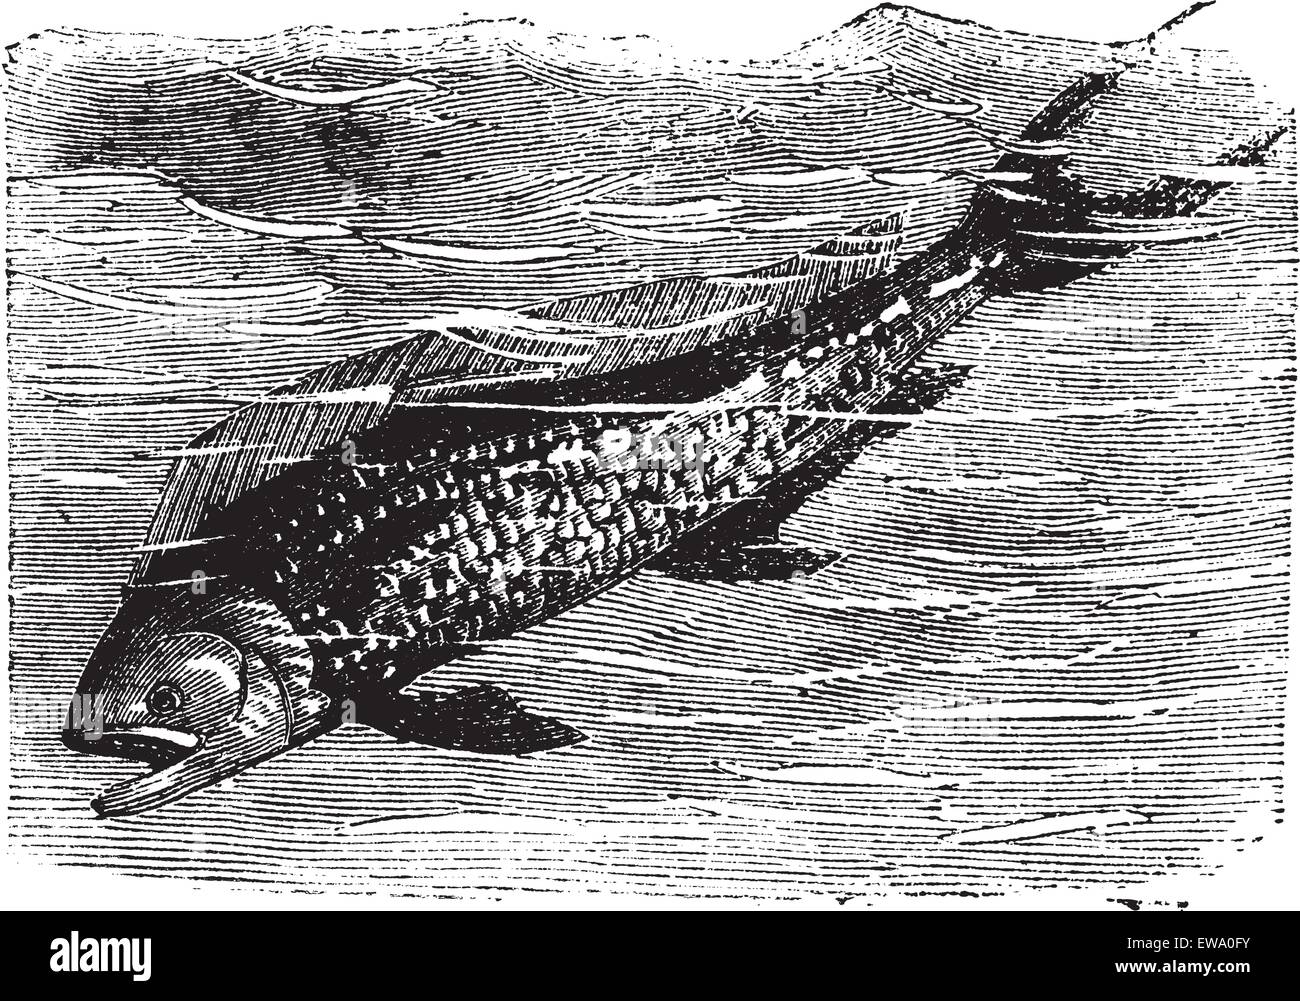 Dolphinfish or Dorado or Coryphaena sp., vintage engraving. Old engraved illustration of a Dolphinfish. Stock Vector